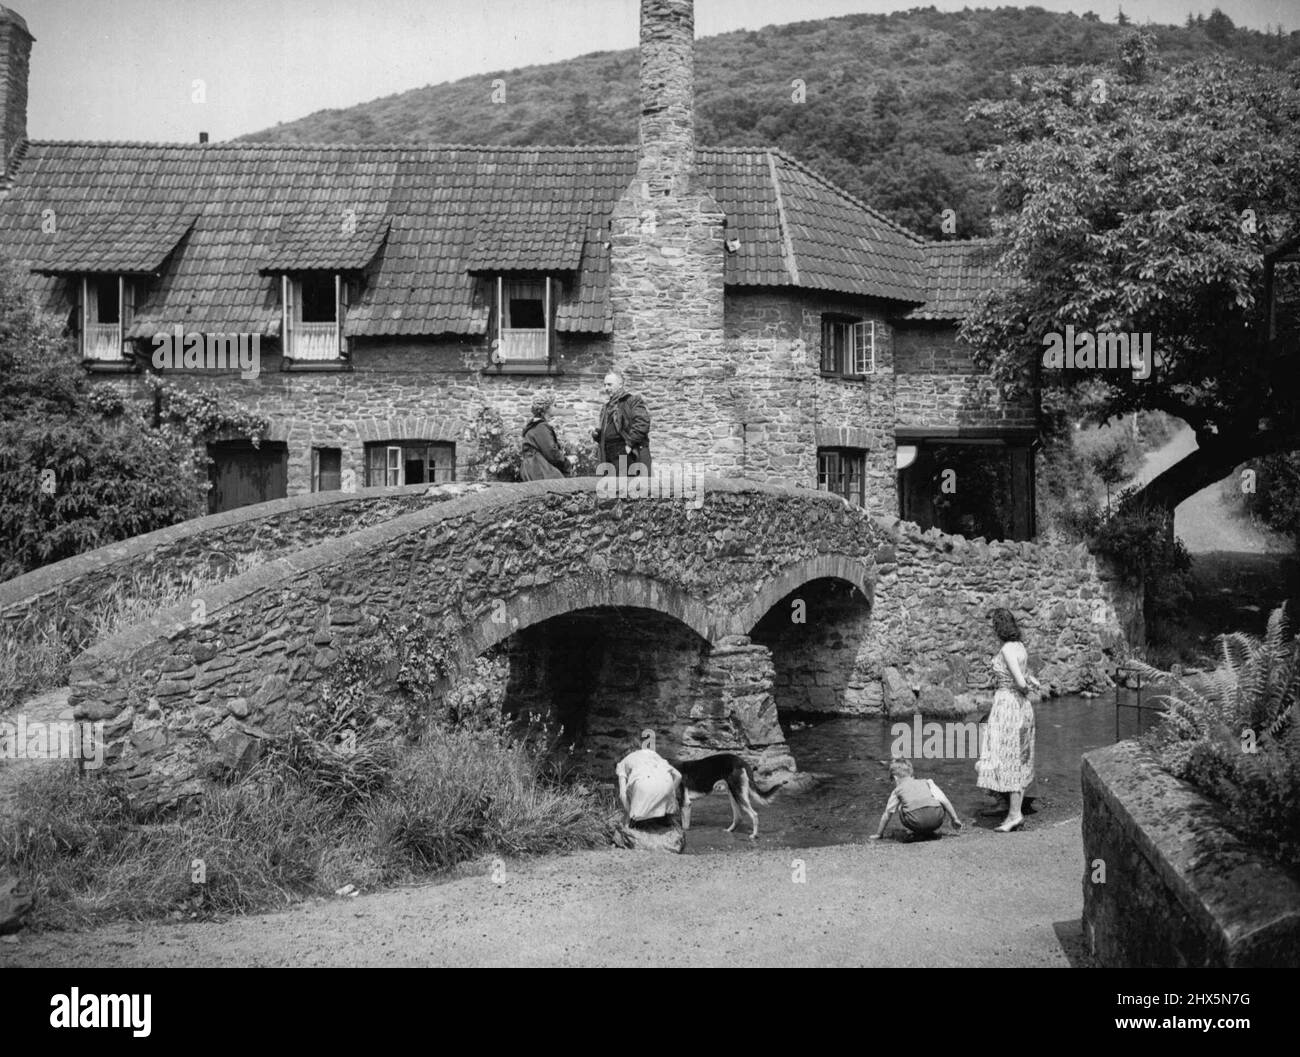 Ancient Britain -- Quaint and picturesque survival from a leisurely age - the ancient hump-back Pack Horse Bridge at Allerford in Somerset. June 21, 1955. (Photo by Reuterphoto). Stock Photo